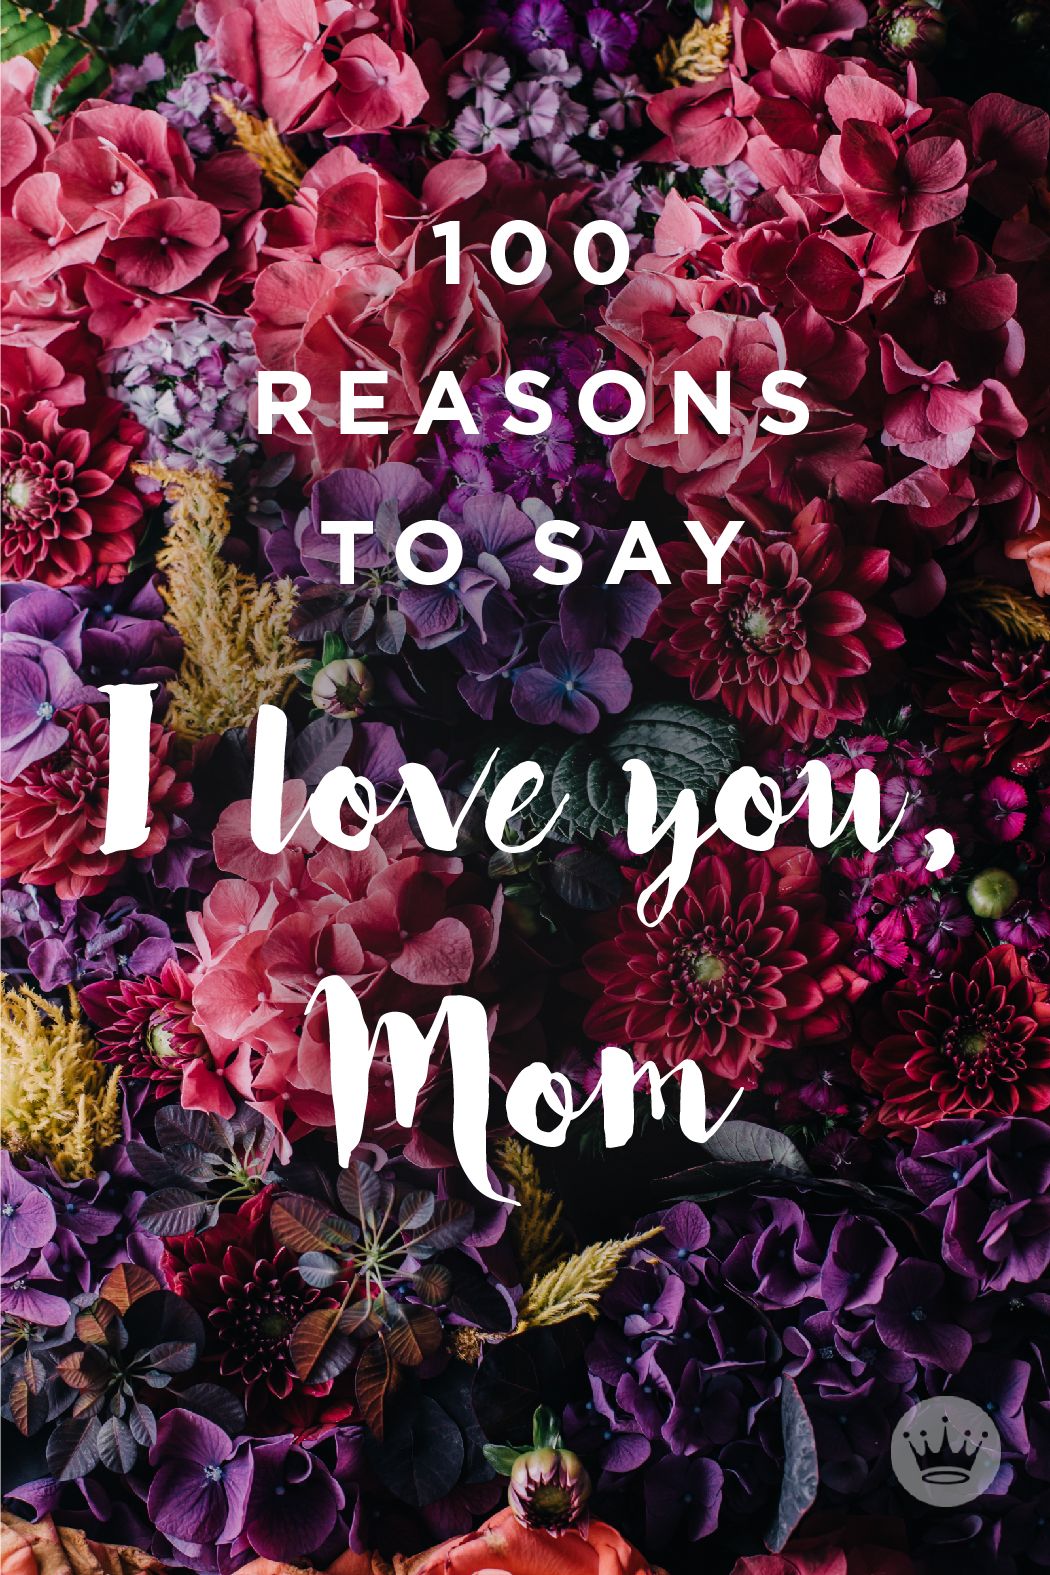 you love mom are there i you